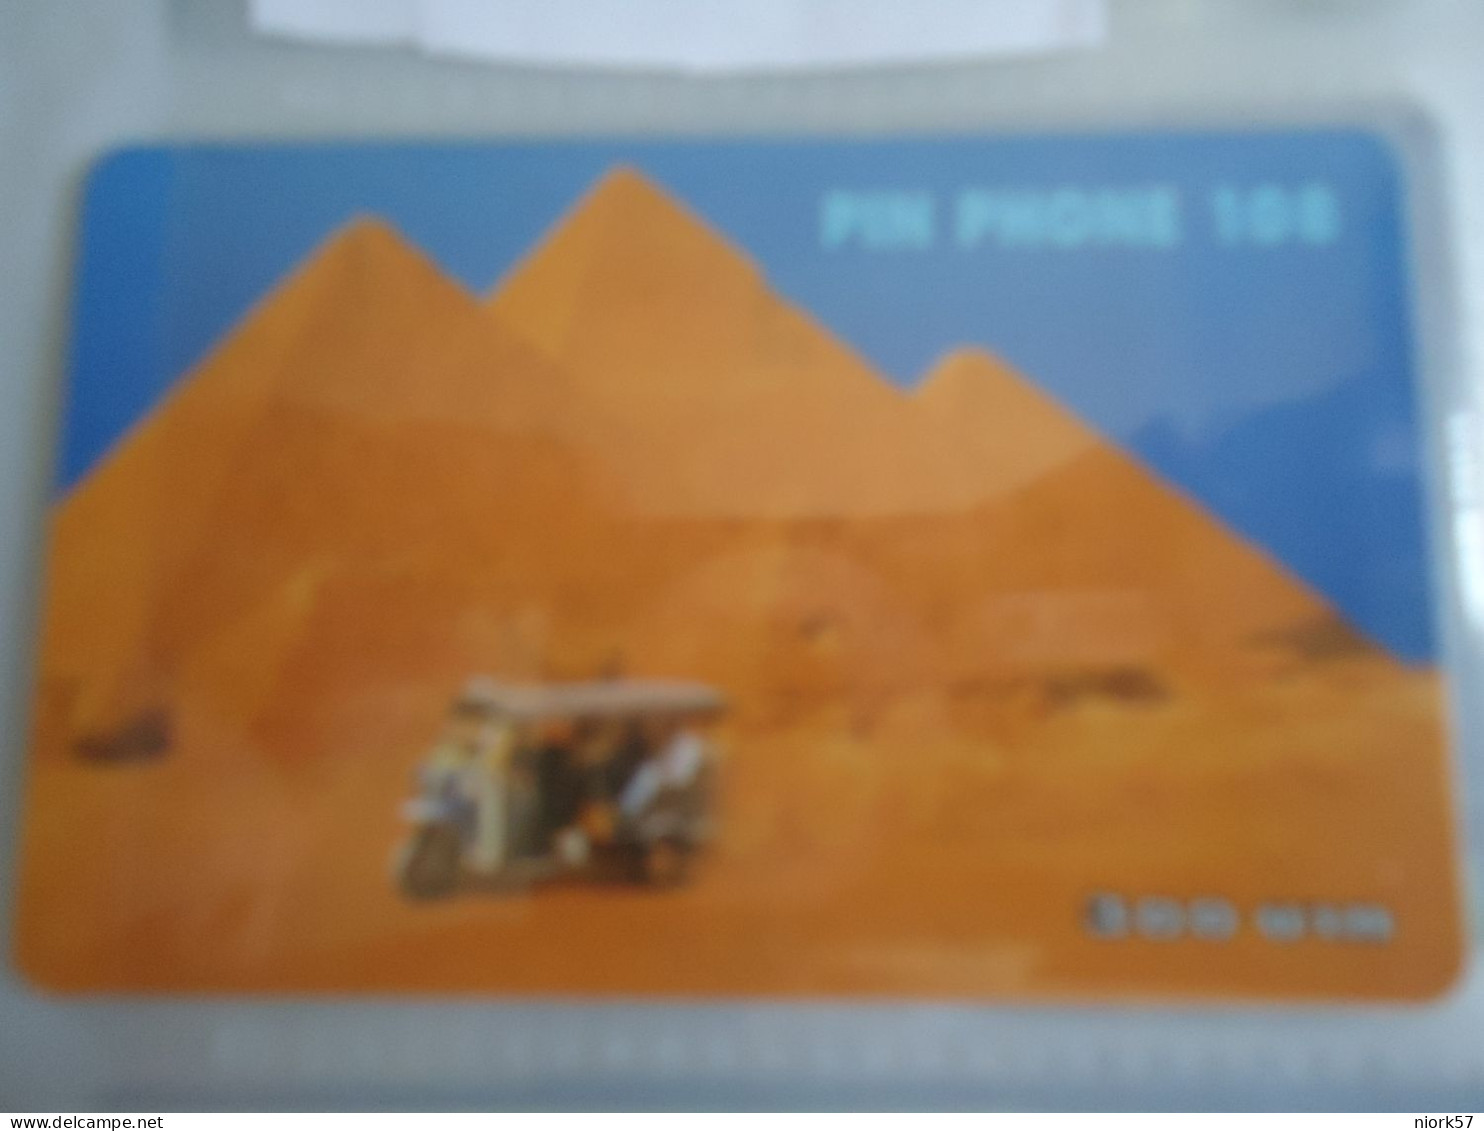 THAILAND USED CARDS PIN 108 WORLD HERITAGES  EGYPT PYRAMIDES - Paisajes